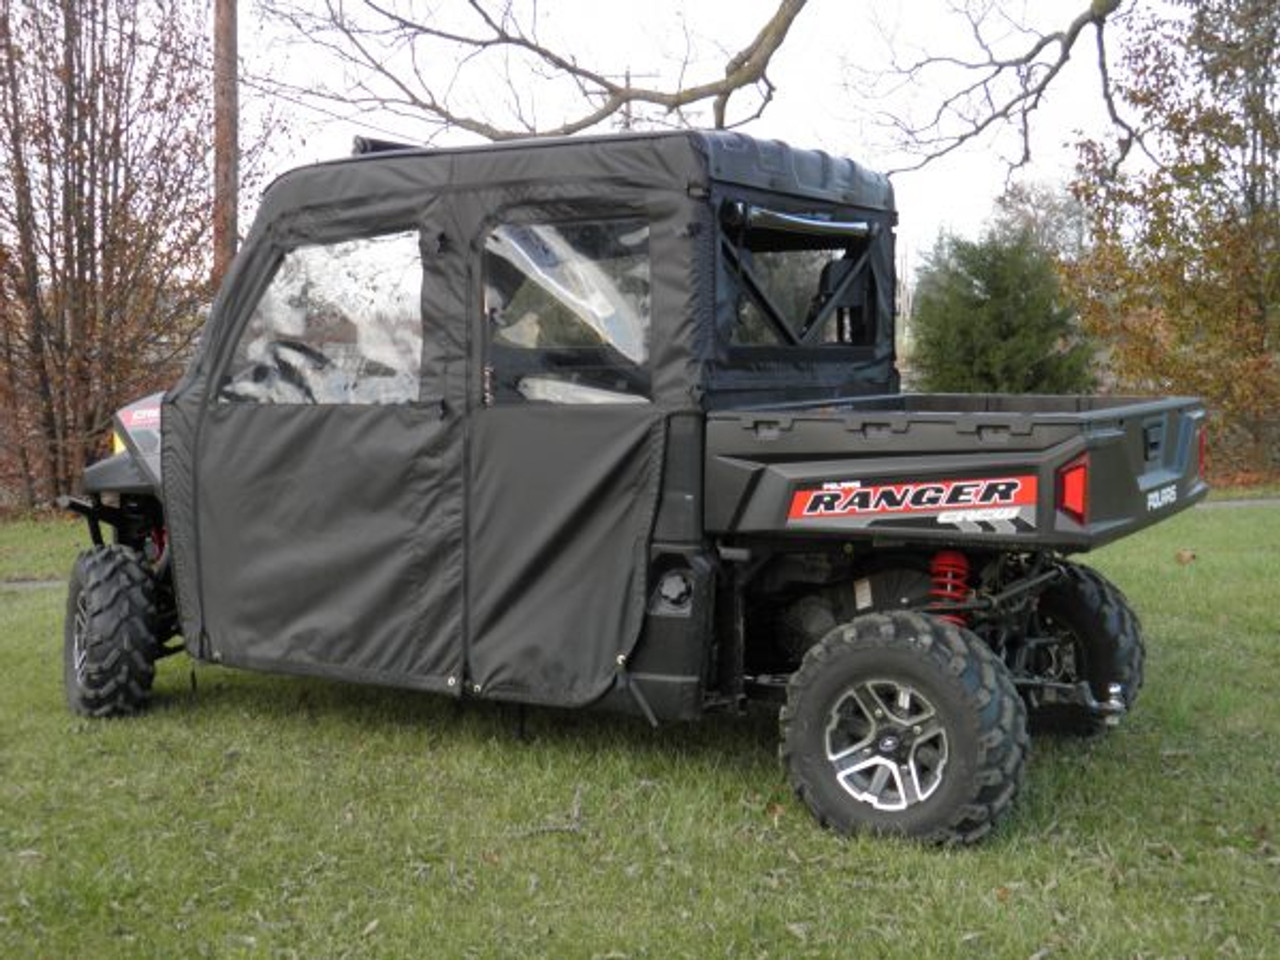 3 Star side x side Polaris Ranger Crew 570-4 doors and rear window side angle view